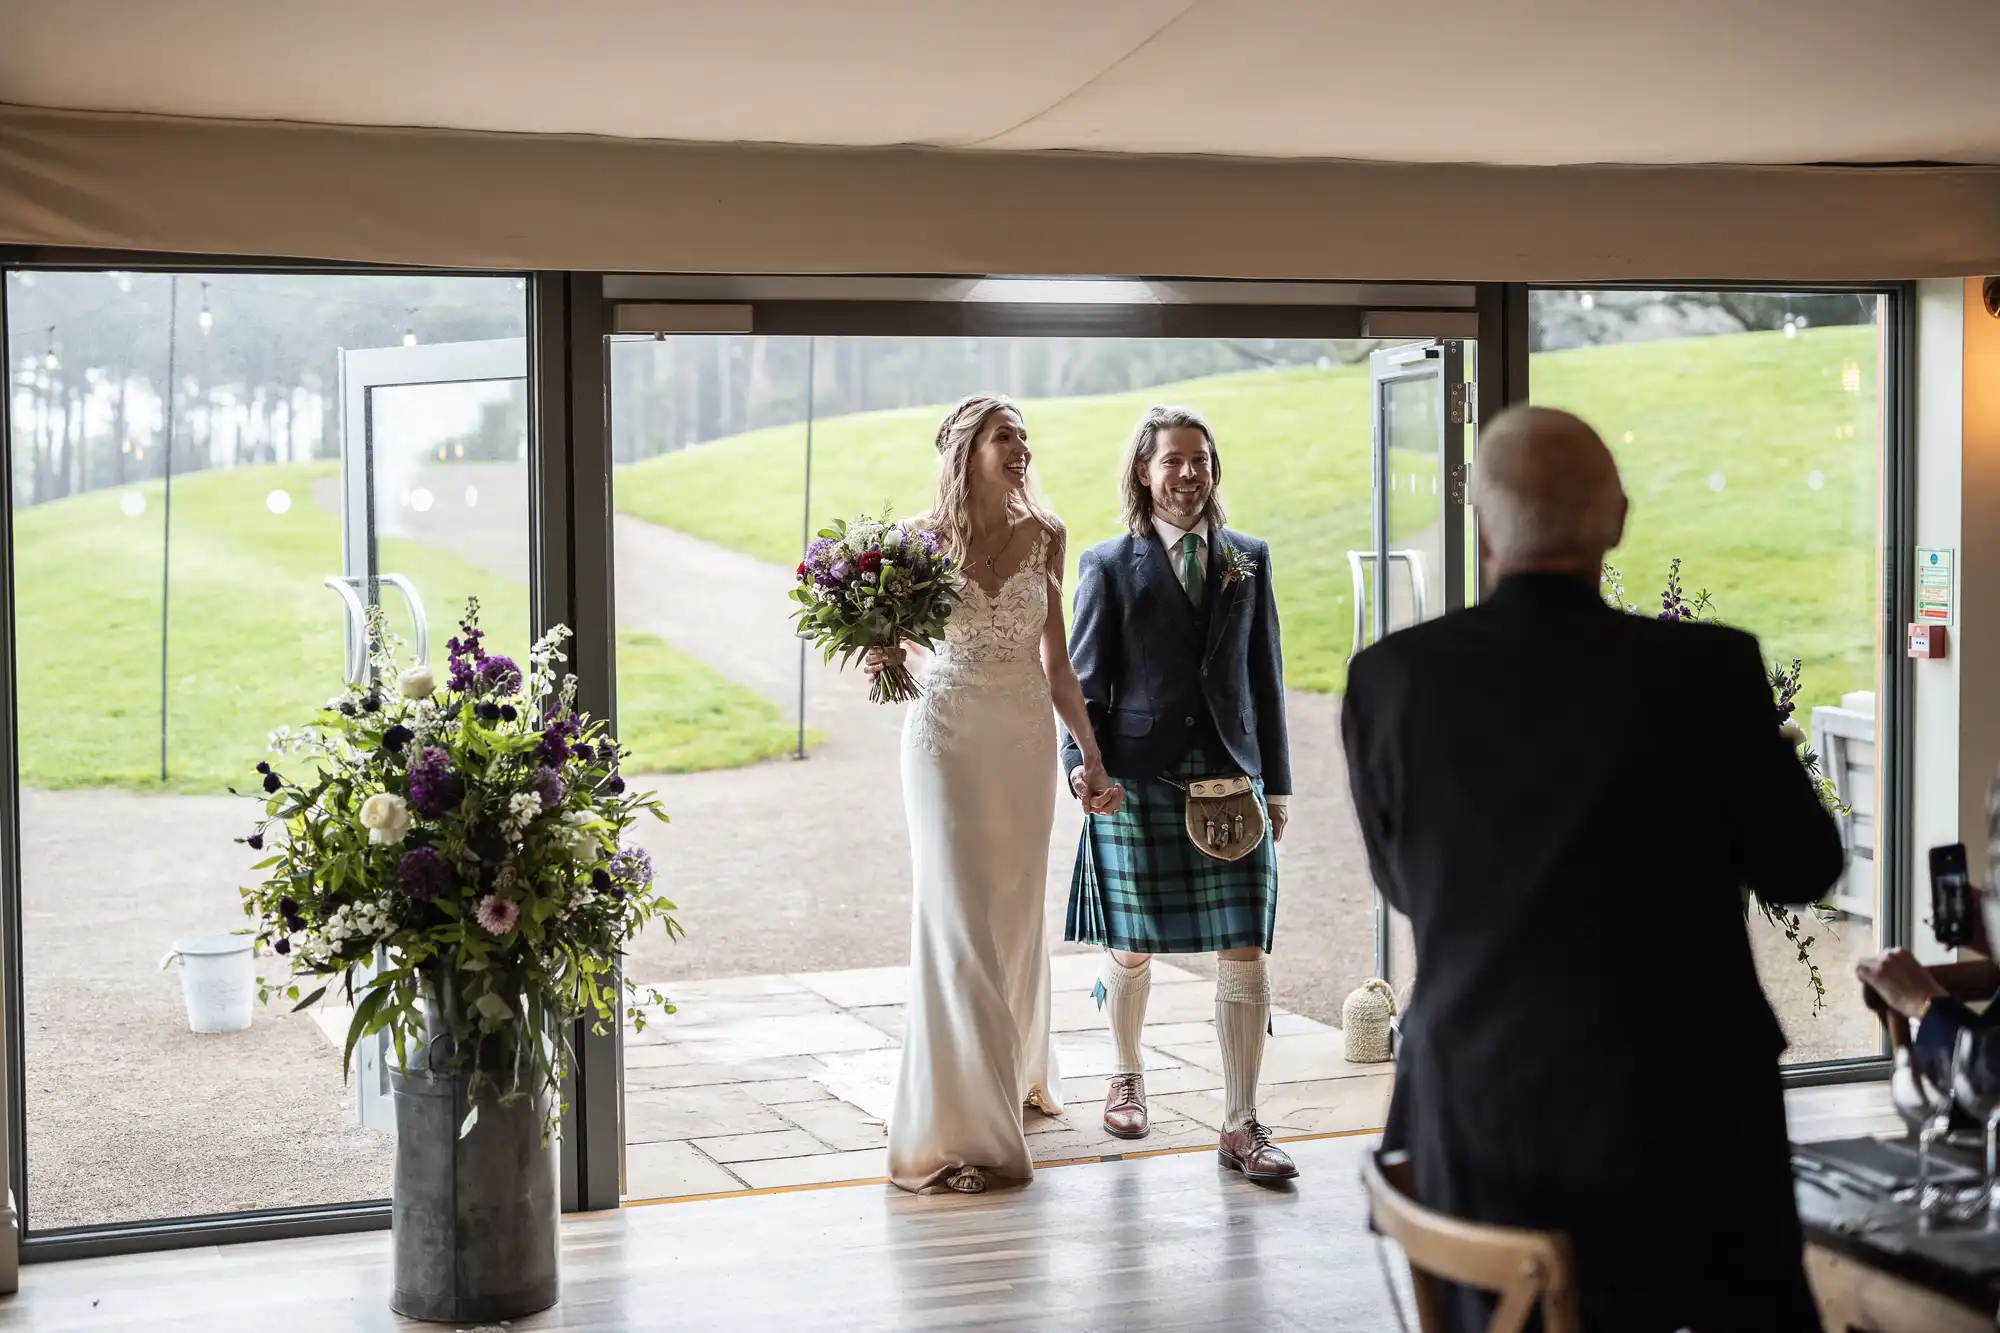 A couple is walking hand-in-hand through a large open door. The woman is wearing a wedding dress and holding a bouquet. The man is dressed in a kilt. An older man is standing nearby with his back to the camera.